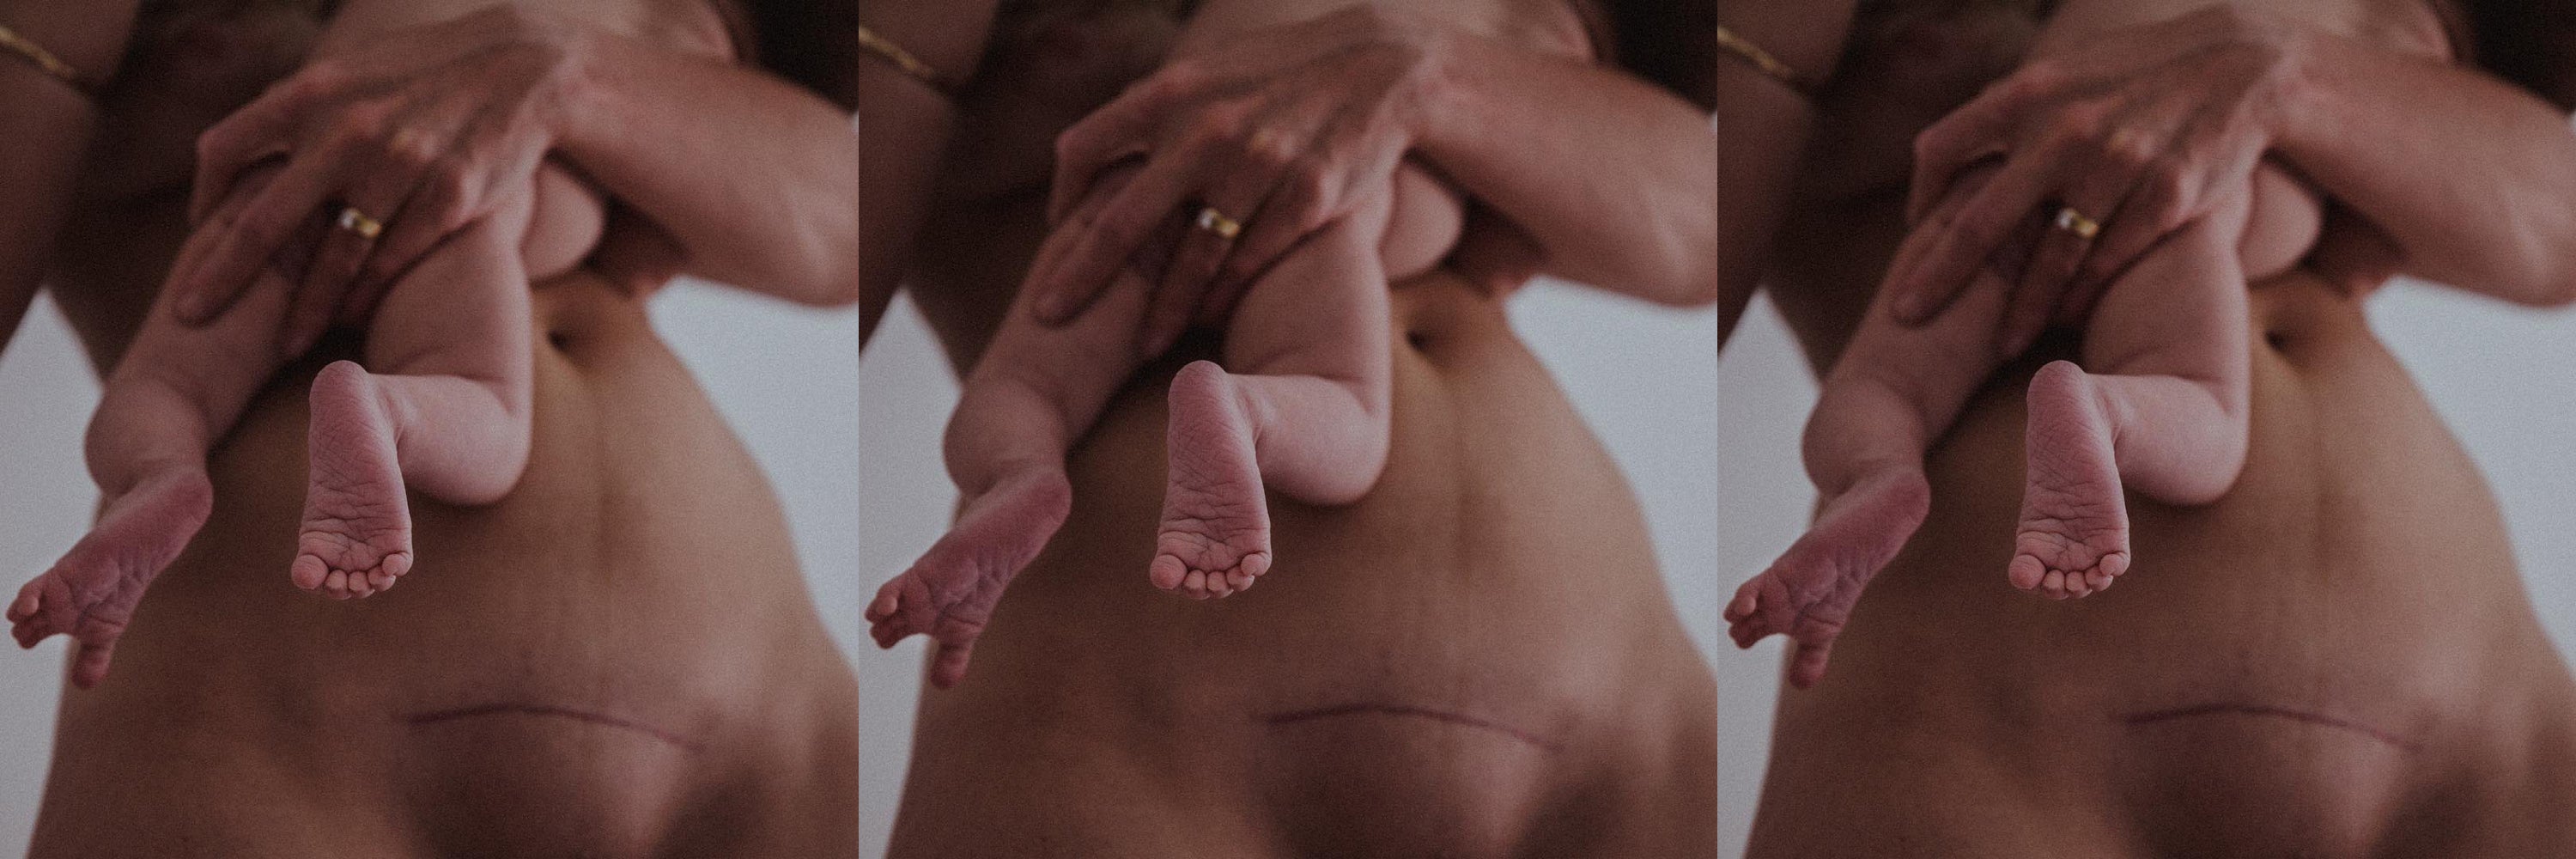 Womans C-Section Scar, holding her baby, c-section recovery trousers